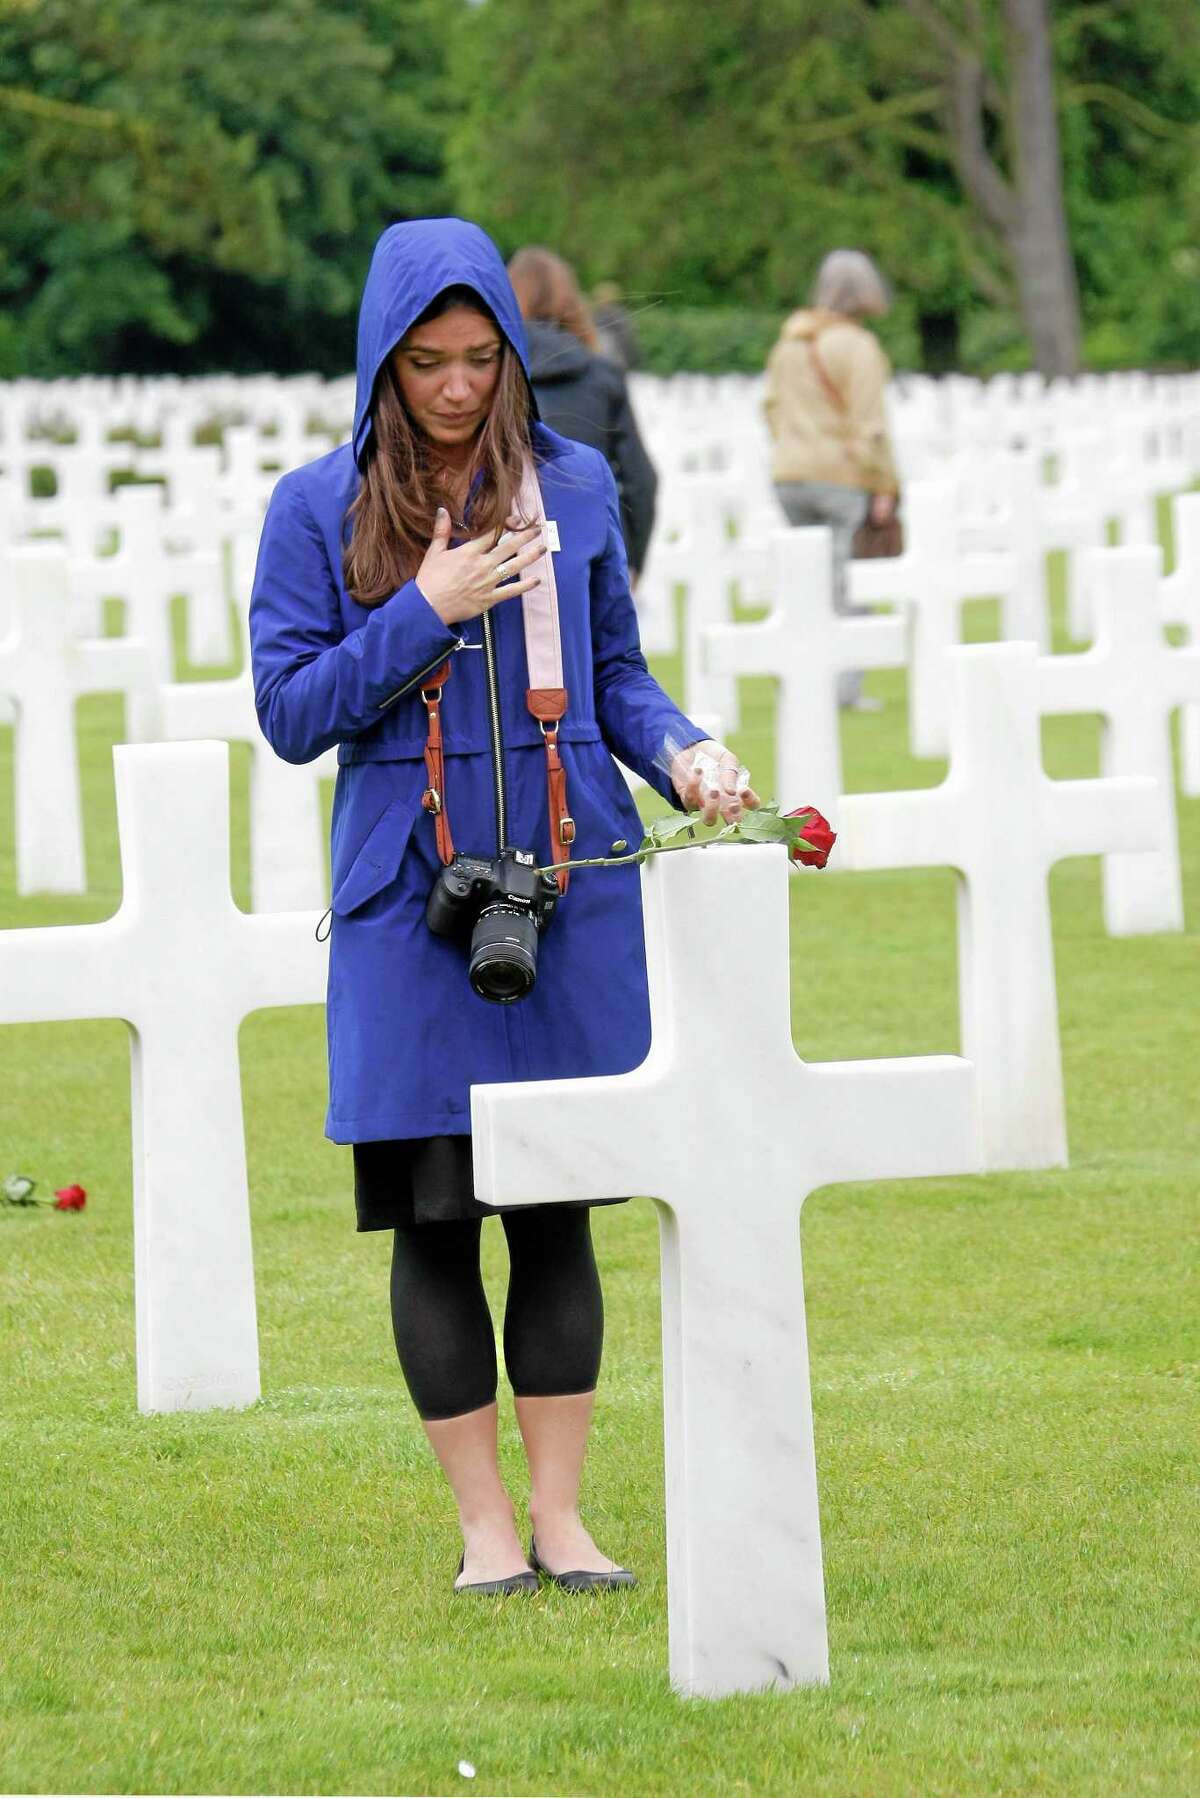 Marissa Neitling, 30, from Lake Oswego, Oregon, places a flower on a grave in the Normandy American Cemetery and Memorial, in Colleville sur Mer, France, June 4, 2014. World leaders and veterans prepare to mark the 70th anniversary of the invasion this week in Normandy. (AP Photo/Claude Paris)